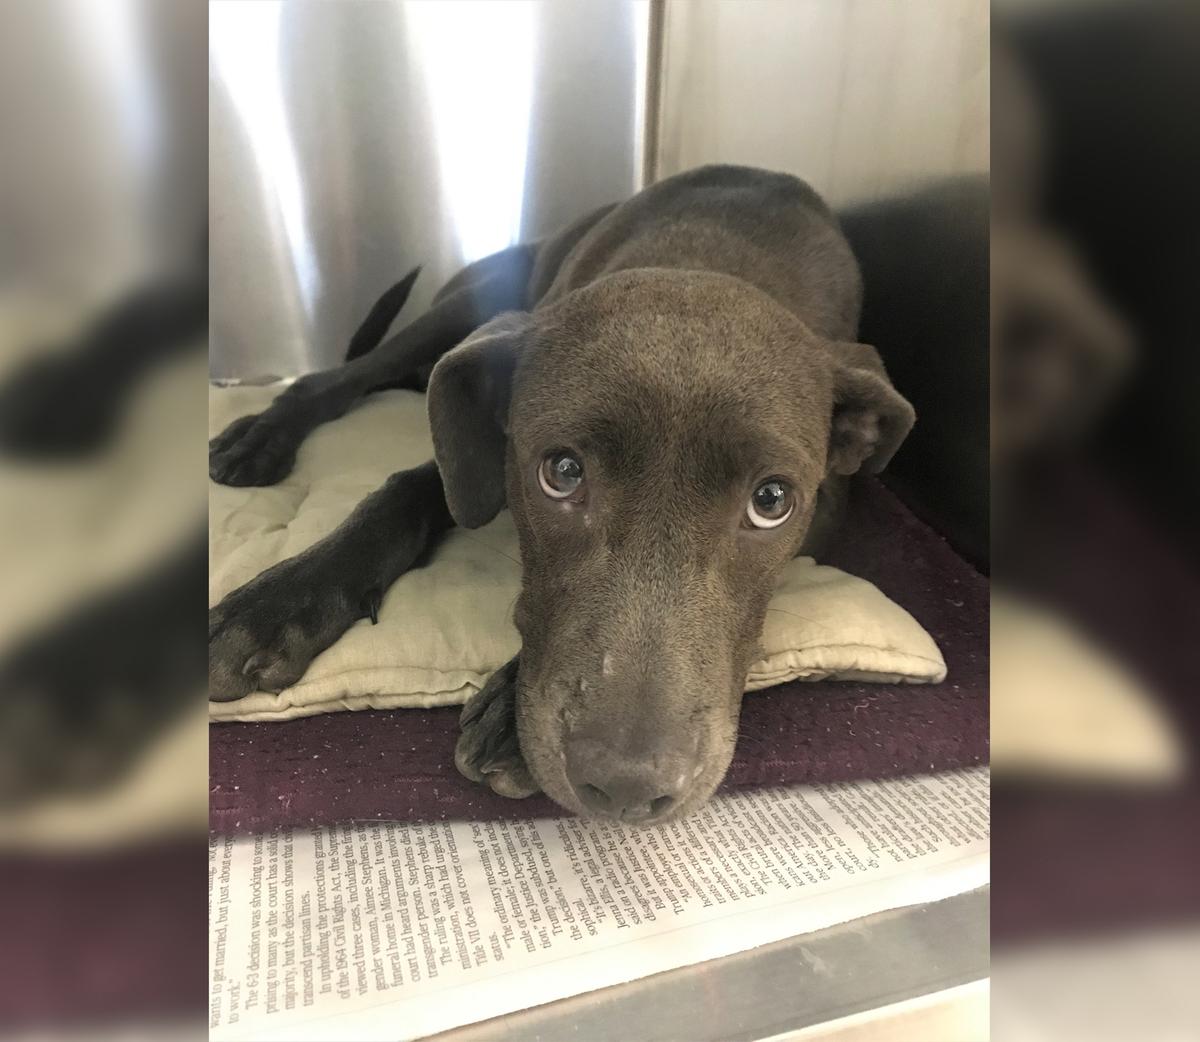 (<a href="https://sahumane.org/images/stories/pdf/employment/2020/12092020_Dog_peppered_with_shotgun_pellets_hopes_to_find_home_for_the_holidays_2.pdf">San Antonio Humane Society</a>)